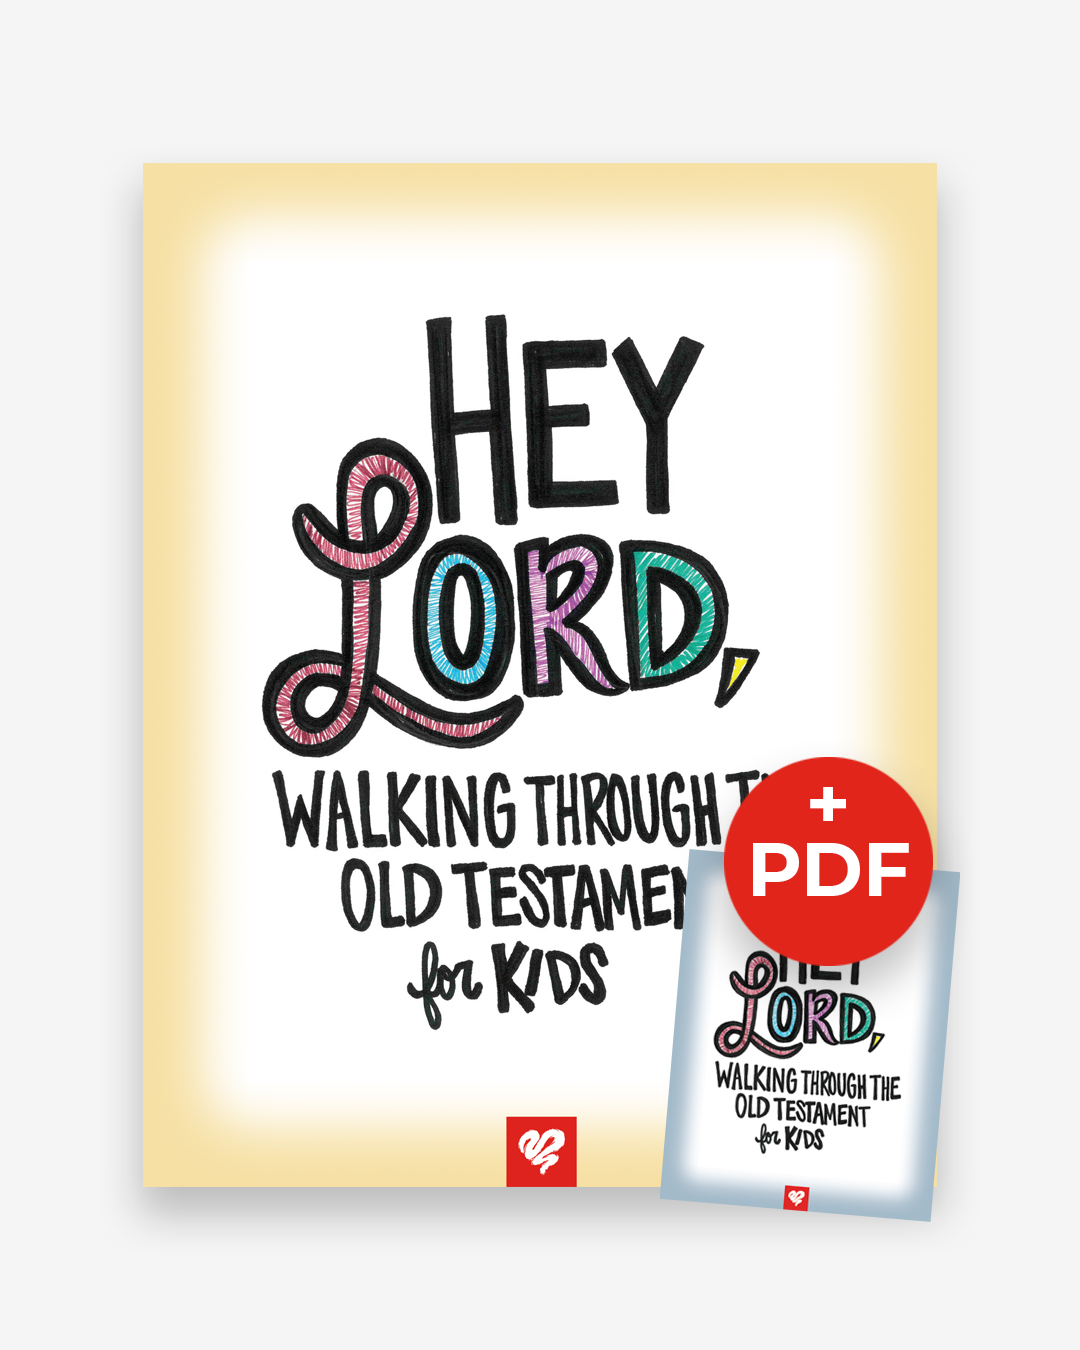 HEY LORD: Walking through the Old Testament for Kids